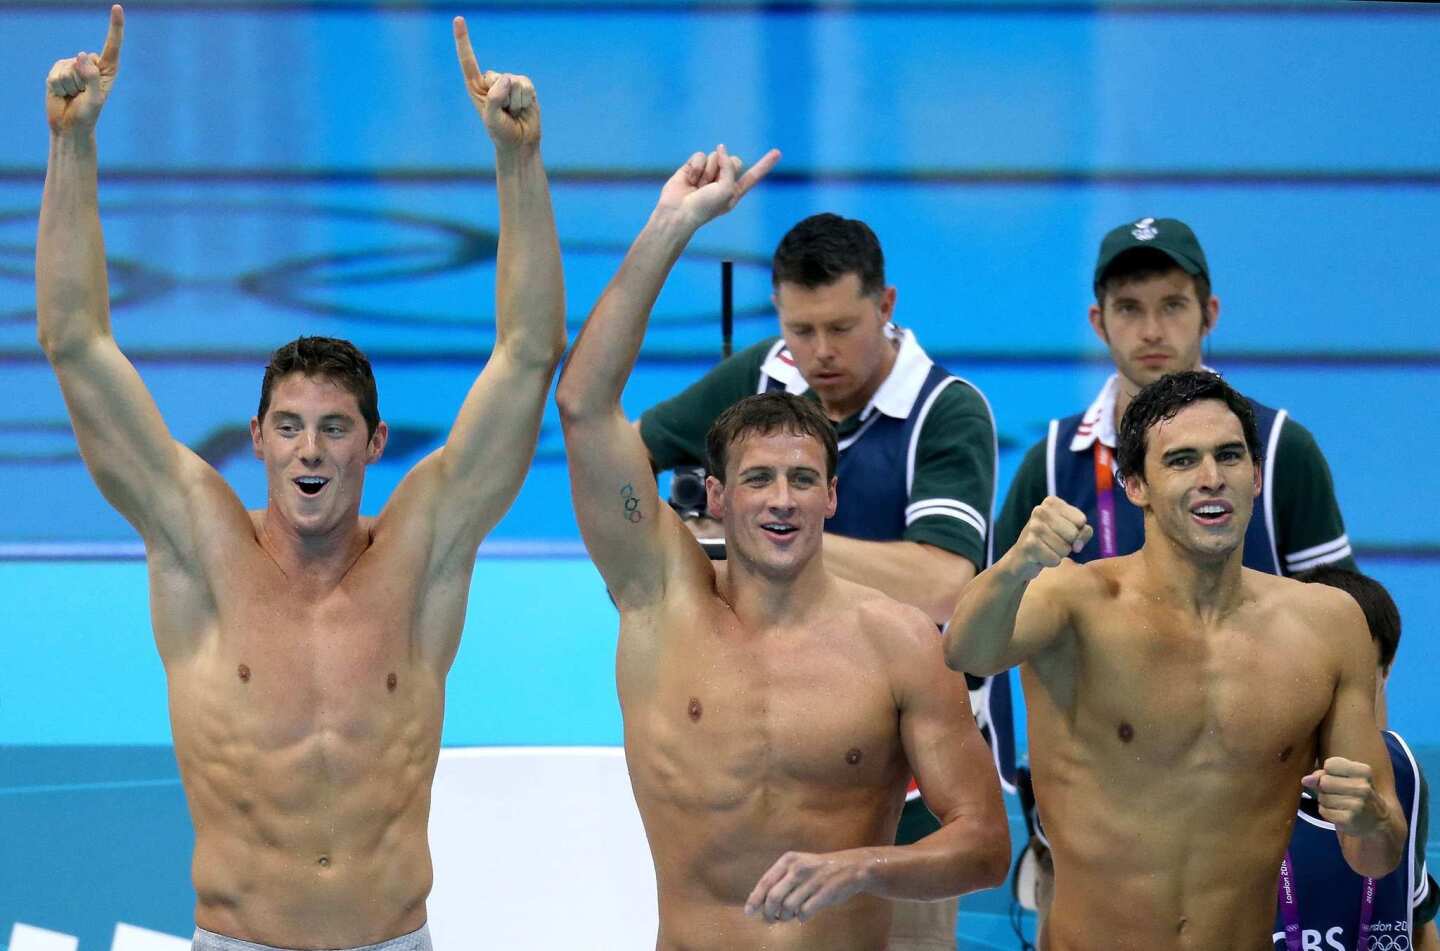 Conor Dwyer, Ryan Lochte and Ricky Berens cheer teammate Michael Phelps as the U.S. men's 8000m freestyle relay team wins the gold medal.